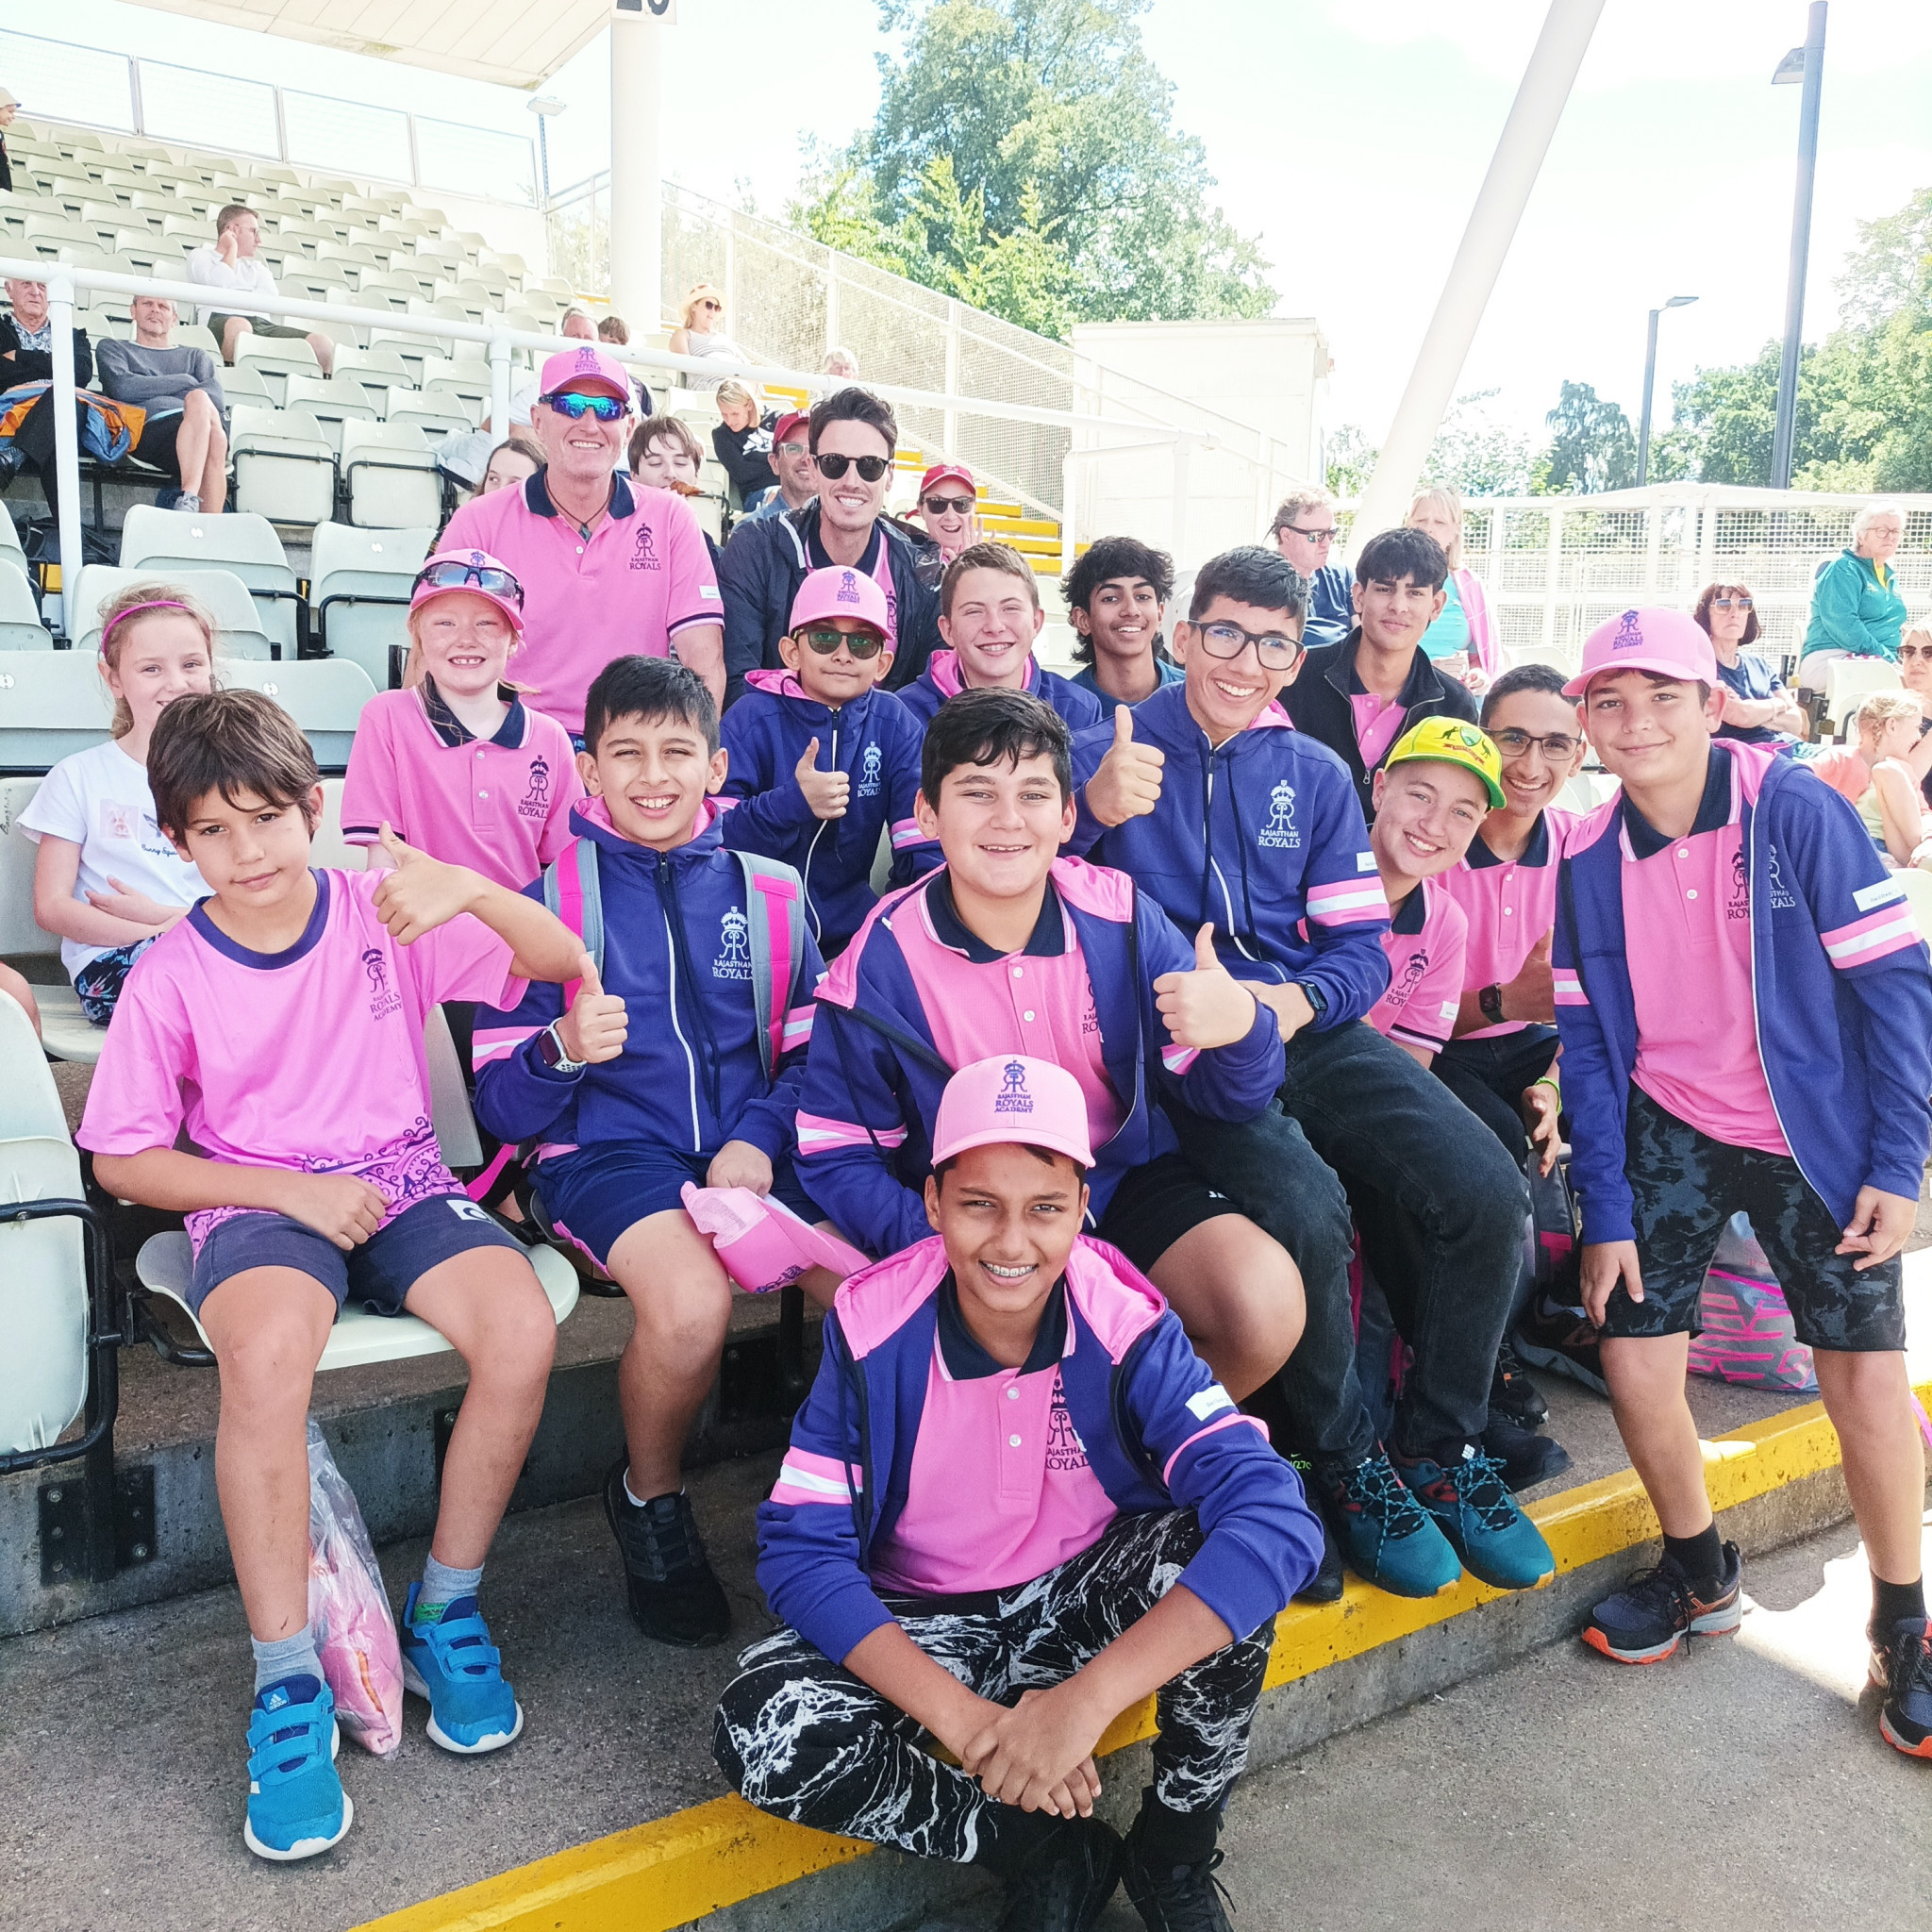 Youngsters from the Rajasthan Royals Academy in the United Arab Emirates enjoyed a day at the Commonwealth Games cricket in Birmingham ©ITG